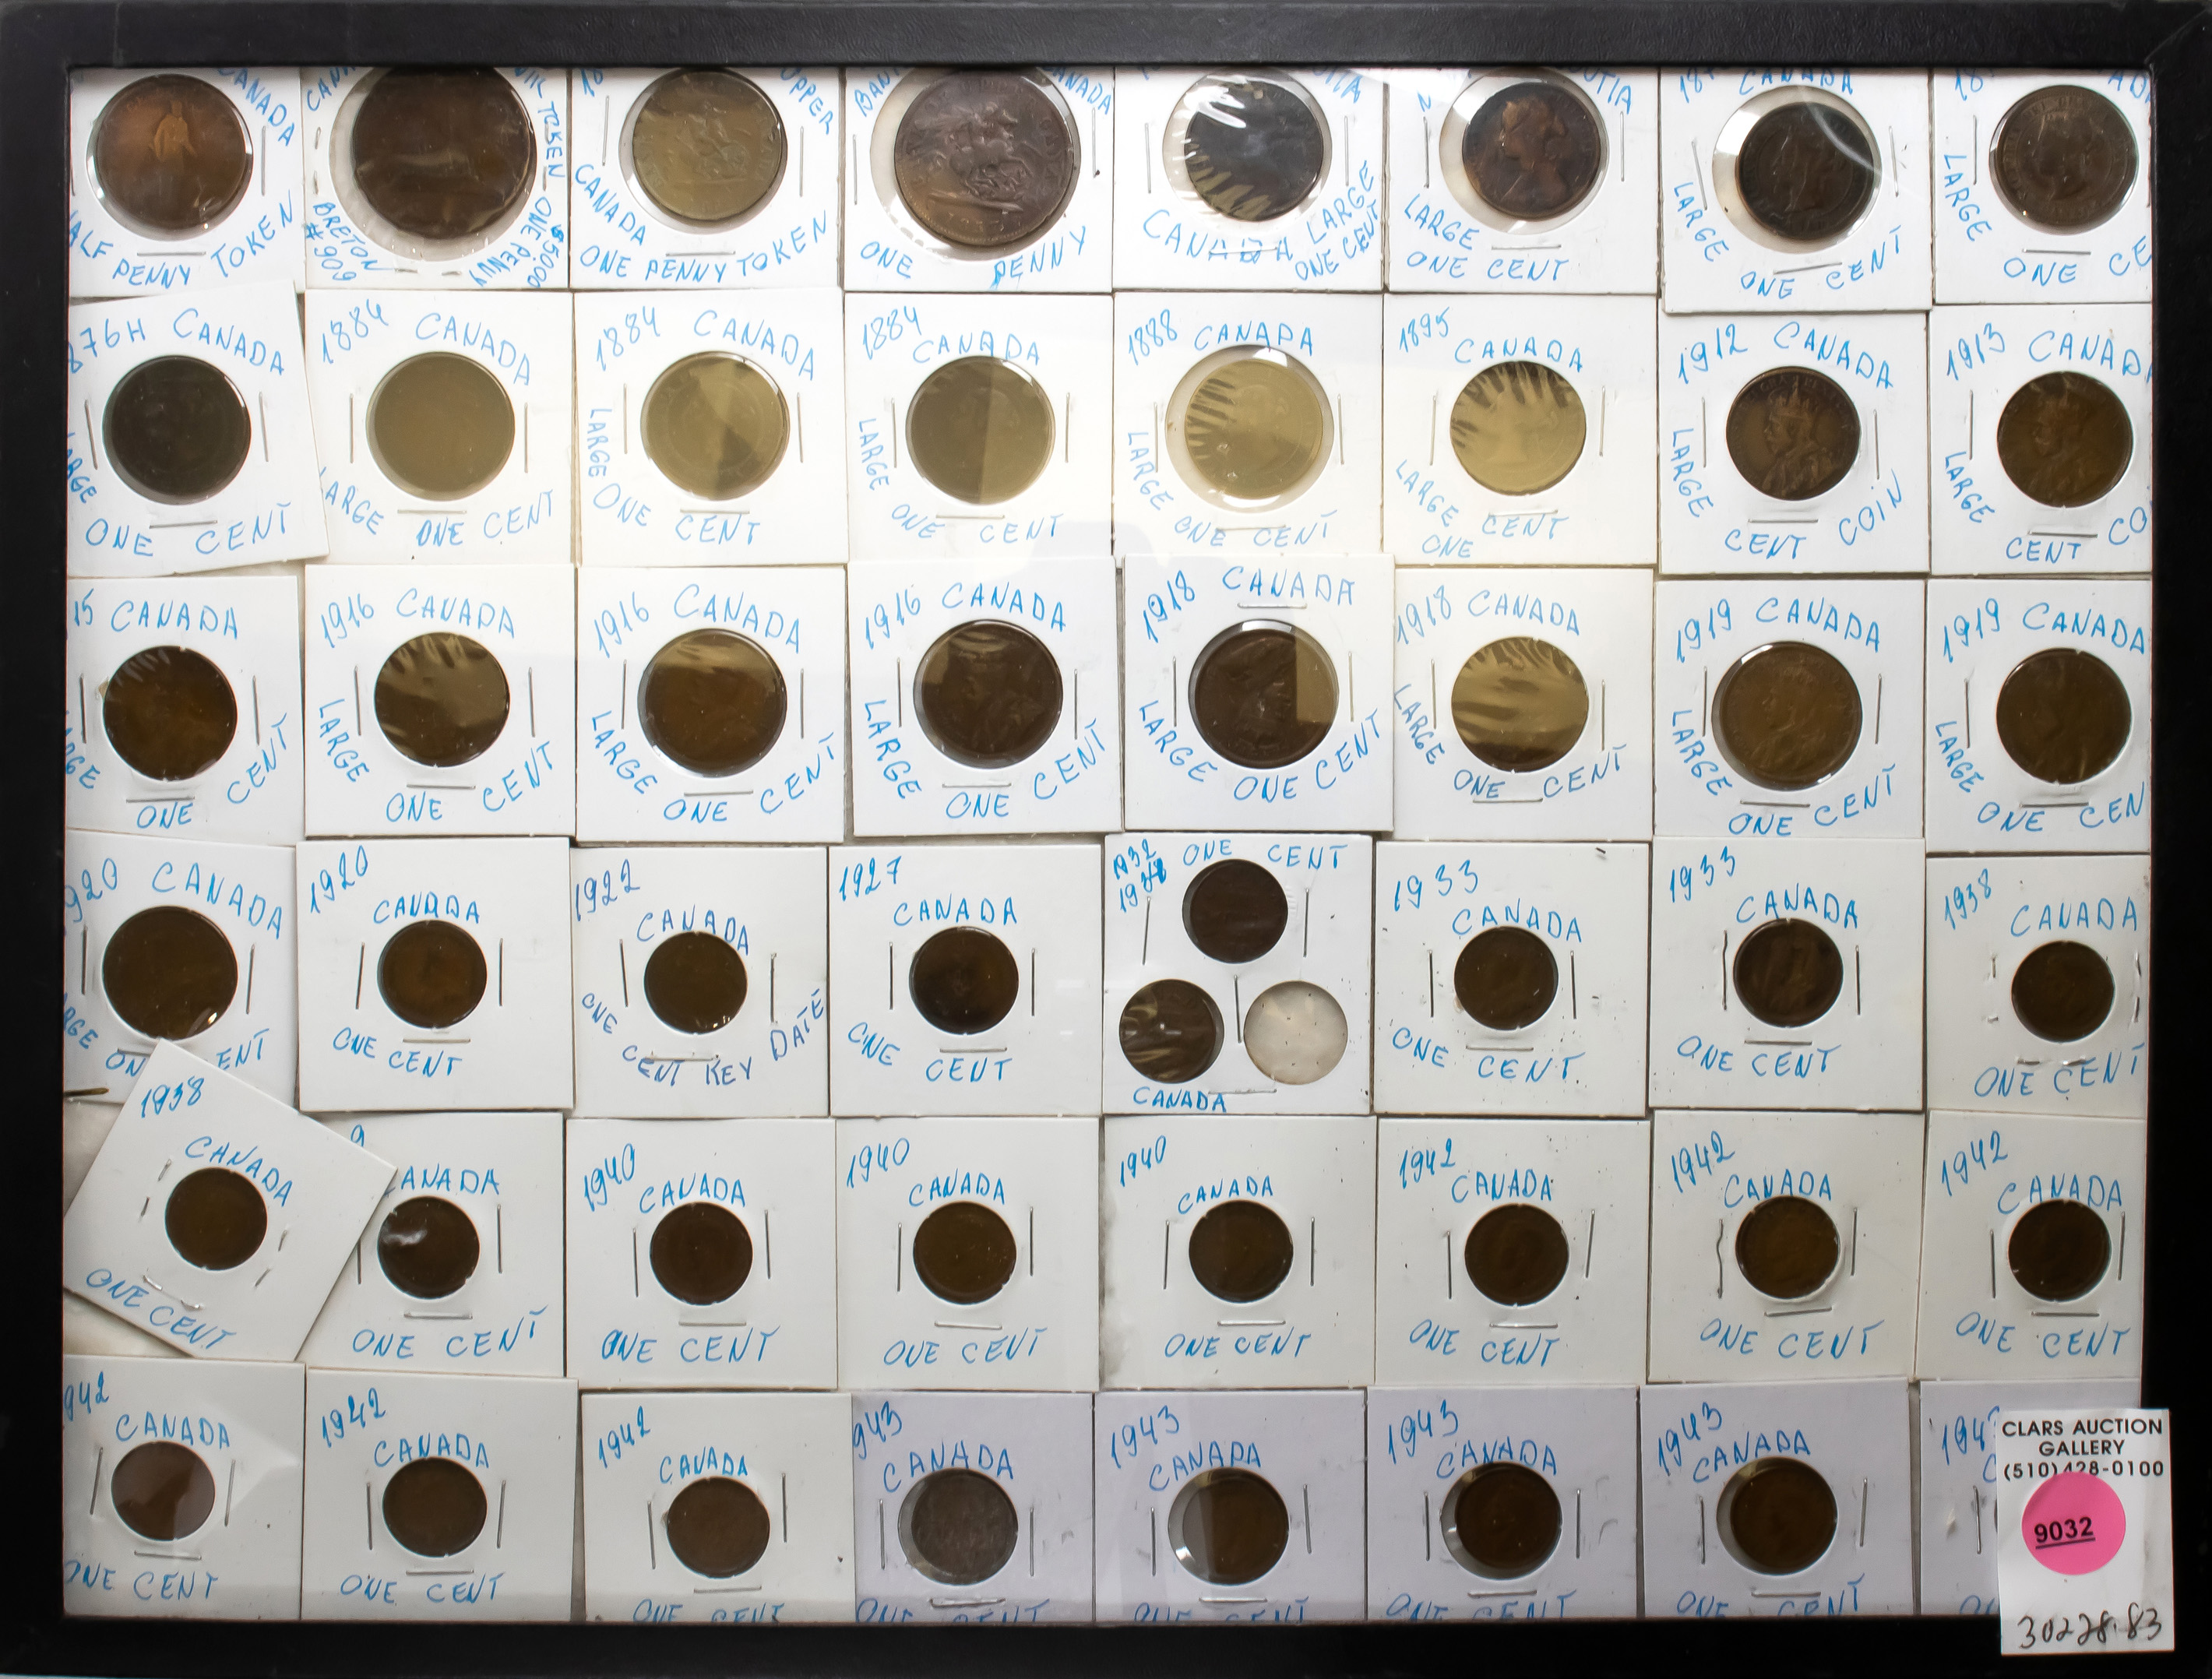  LOT OF 49 CANADIAN COINS 25  3a3cc6